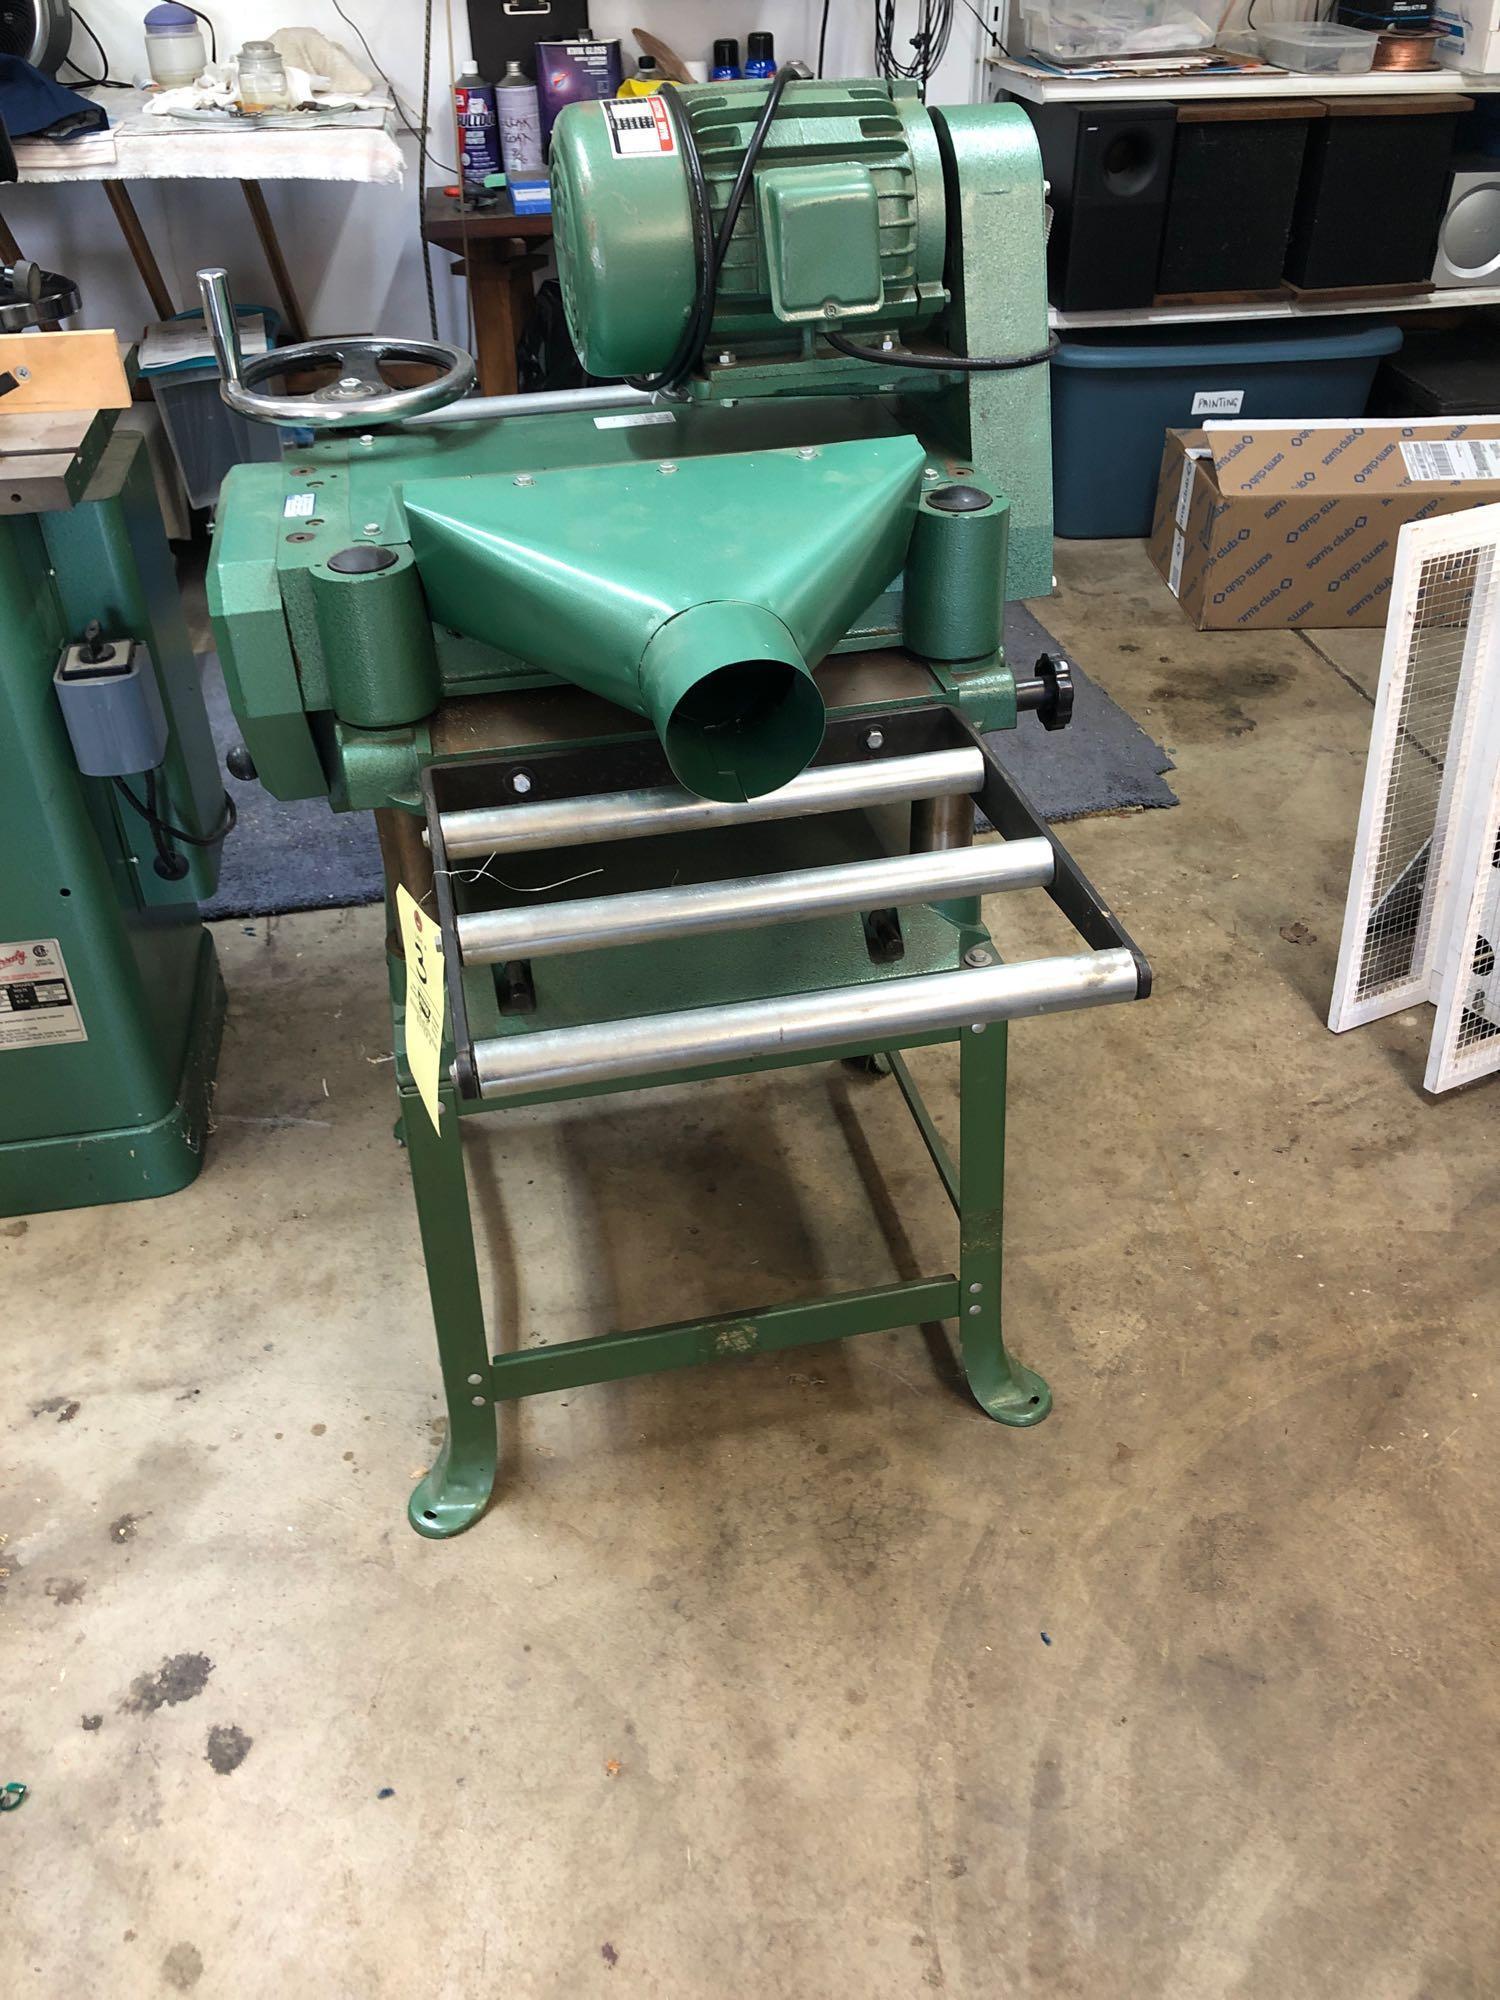 1997 Grizzly 15 inch planer model G1021